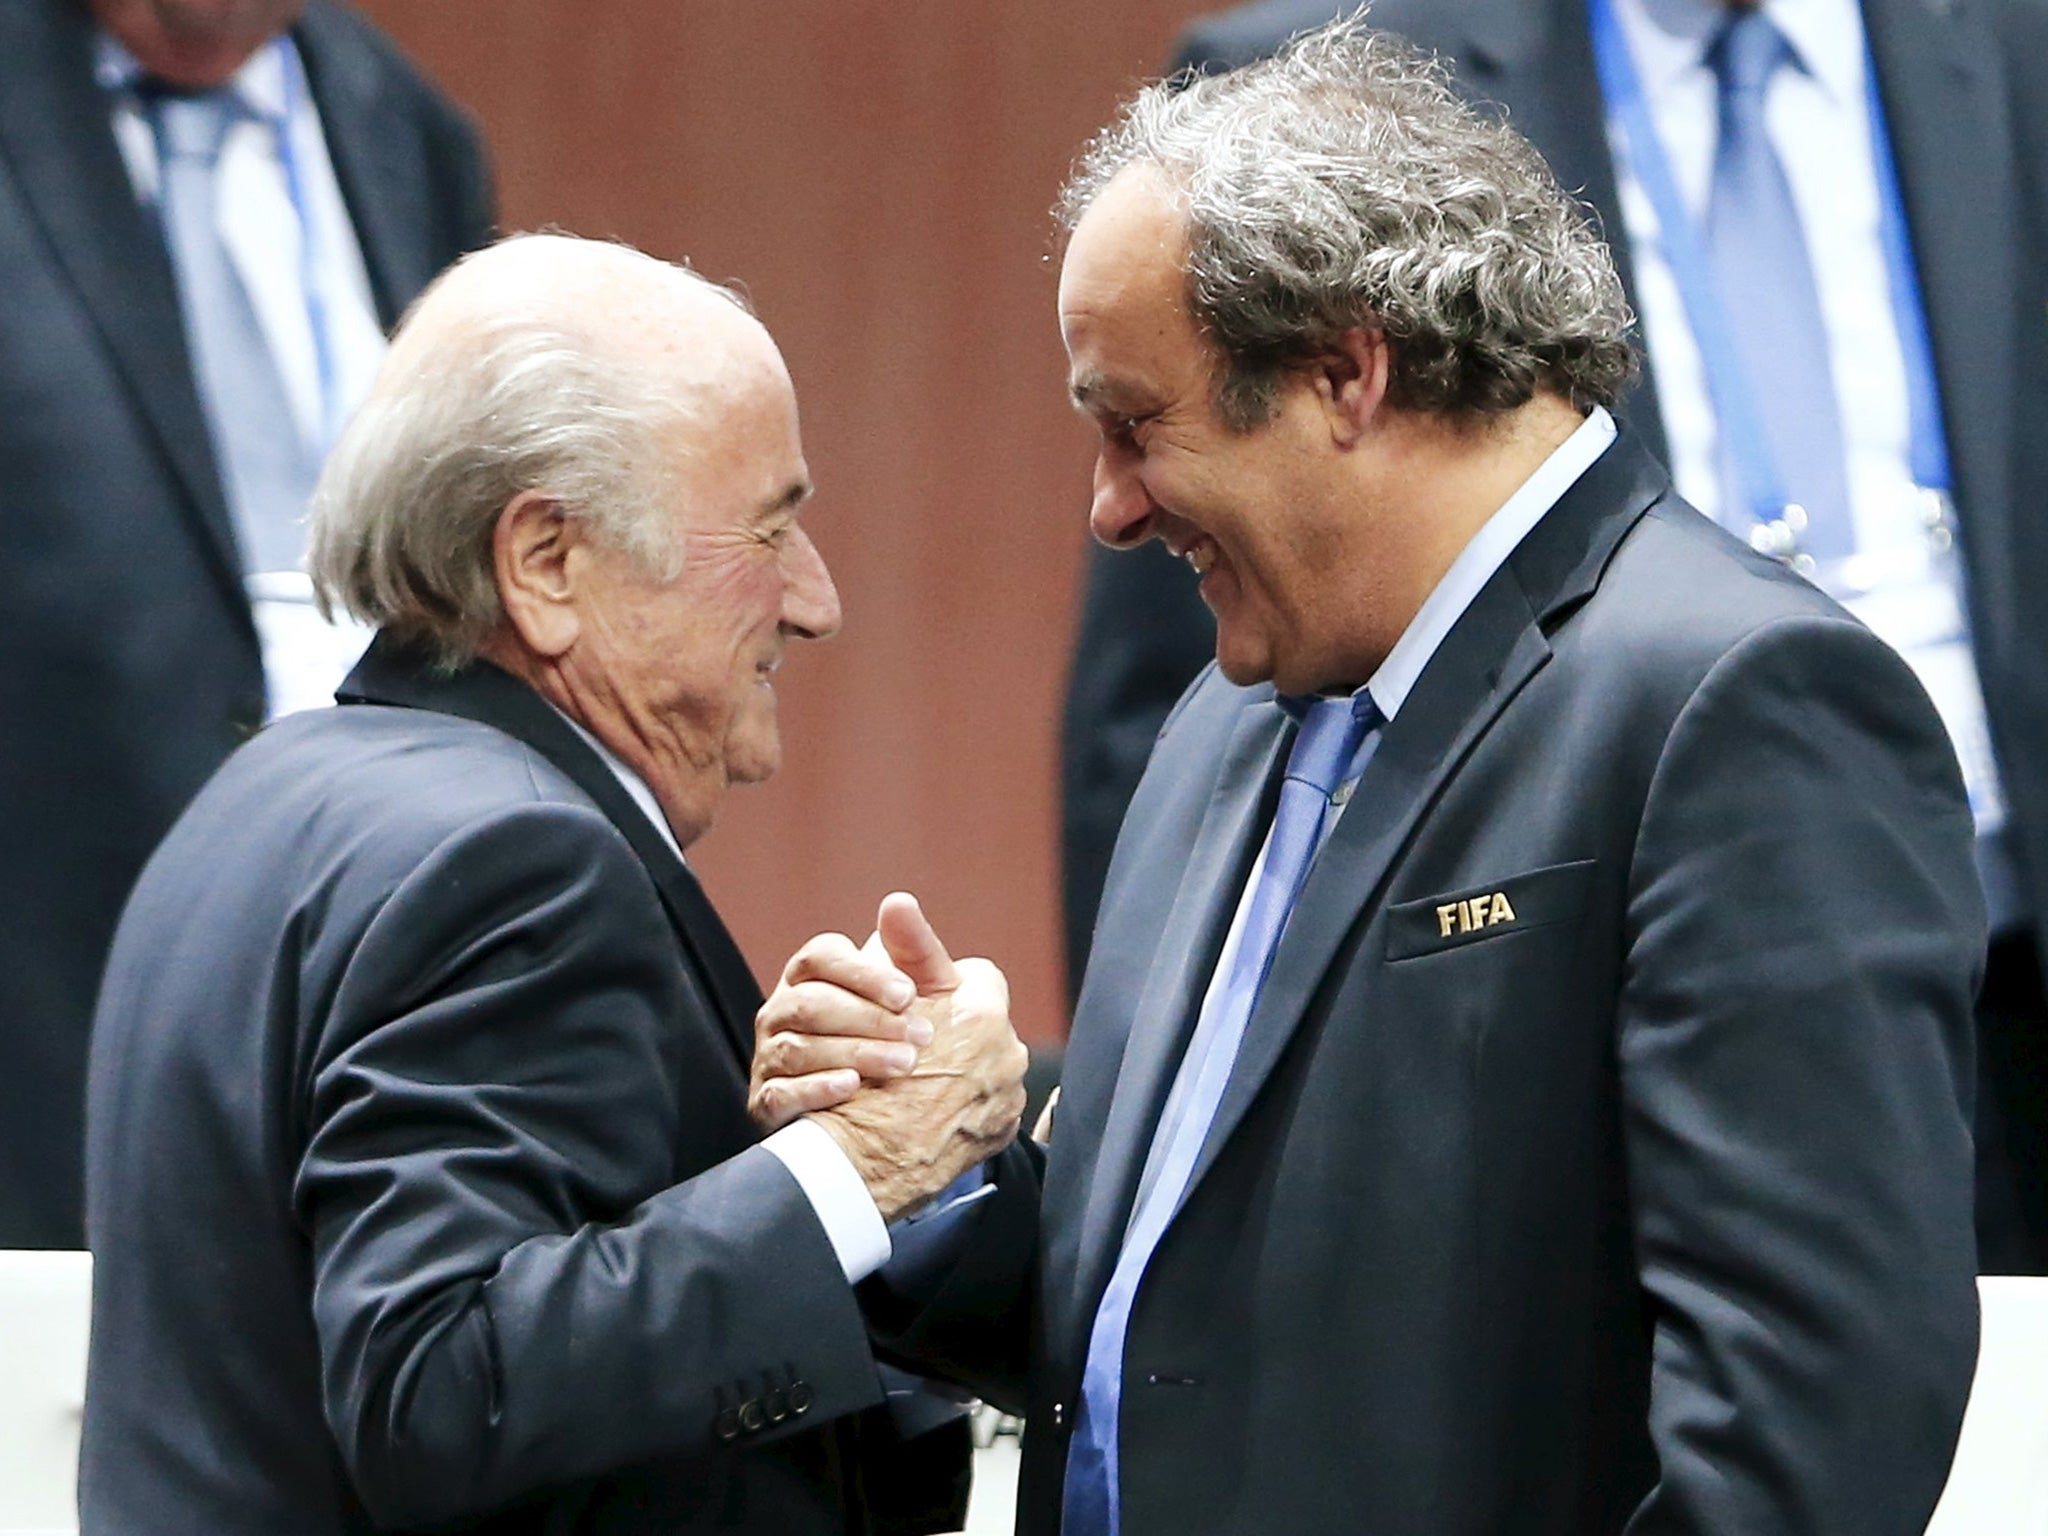 FIFA President Sepp Blatter (Foreground-L) shakes hands with UEFA president Michel Platini after being re-elected following a vote to decide on the FIFA presidency in Zurich on May 29, 2015